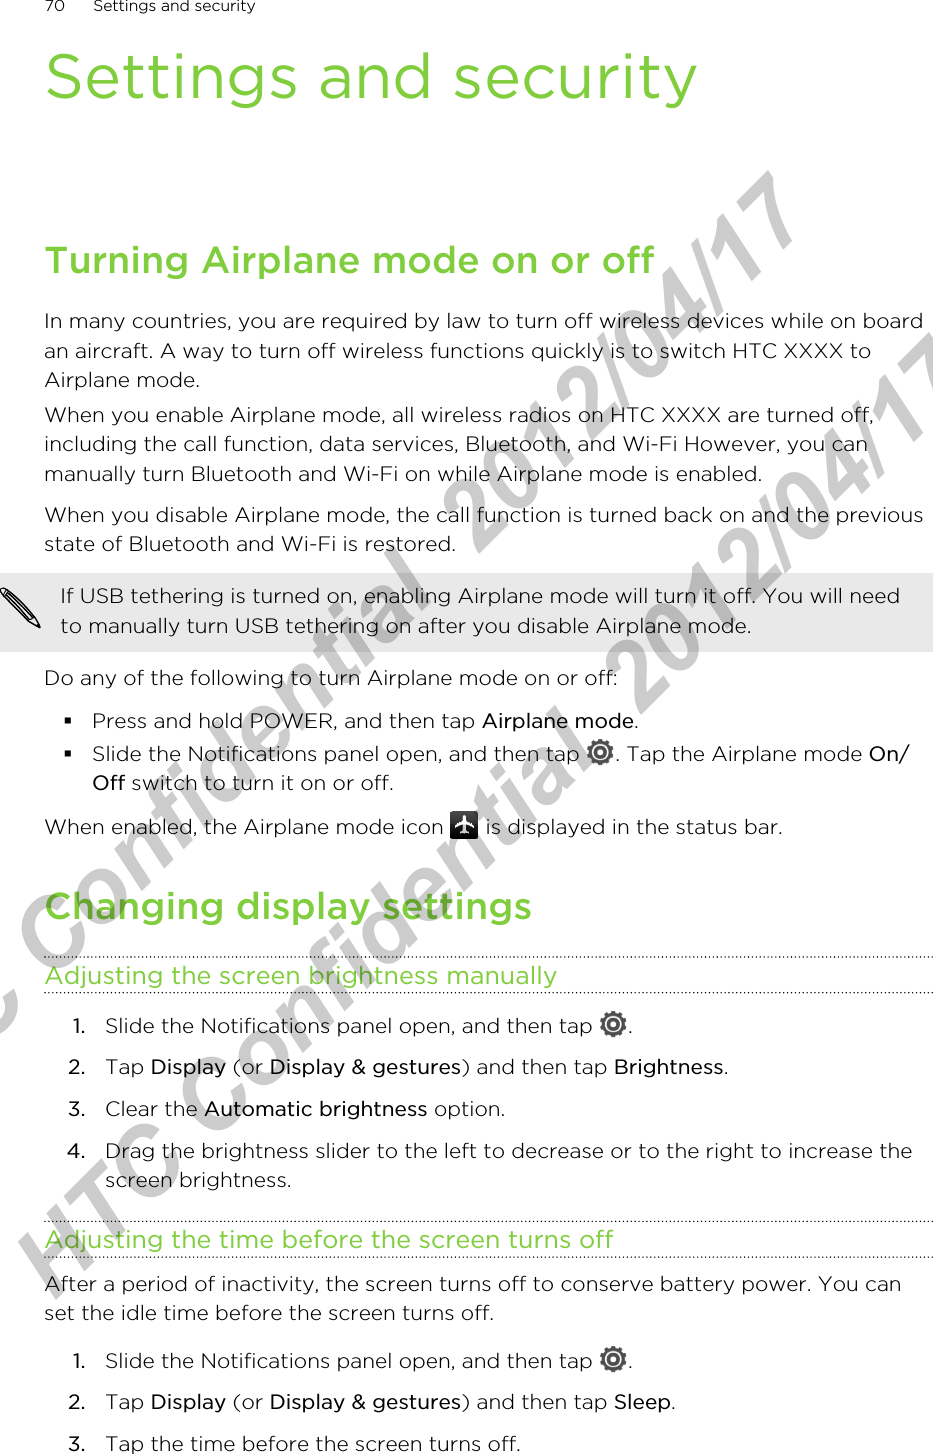 Settings and securityTurning Airplane mode on or offIn many countries, you are required by law to turn off wireless devices while on boardan aircraft. A way to turn off wireless functions quickly is to switch HTC XXXX toAirplane mode.When you enable Airplane mode, all wireless radios on HTC XXXX are turned off,including the call function, data services, Bluetooth, and Wi-Fi However, you canmanually turn Bluetooth and Wi-Fi on while Airplane mode is enabled.When you disable Airplane mode, the call function is turned back on and the previousstate of Bluetooth and Wi-Fi is restored.If USB tethering is turned on, enabling Airplane mode will turn it off. You will needto manually turn USB tethering on after you disable Airplane mode.Do any of the following to turn Airplane mode on or off:§Press and hold POWER, and then tap Airplane mode.§Slide the Notifications panel open, and then tap  . Tap the Airplane mode On/Off switch to turn it on or off.When enabled, the Airplane mode icon   is displayed in the status bar.Changing display settingsAdjusting the screen brightness manually1. Slide the Notifications panel open, and then tap  .2. Tap Display (or Display &amp; gestures) and then tap Brightness.3. Clear the Automatic brightness option.4. Drag the brightness slider to the left to decrease or to the right to increase thescreen brightness.Adjusting the time before the screen turns offAfter a period of inactivity, the screen turns off to conserve battery power. You canset the idle time before the screen turns off.1. Slide the Notifications panel open, and then tap  .2. Tap Display (or Display &amp; gestures) and then tap Sleep.3. Tap the time before the screen turns off.70 Settings and securityHTC Confidential  2012/04/17  HTC Confidential  2012/04/17 